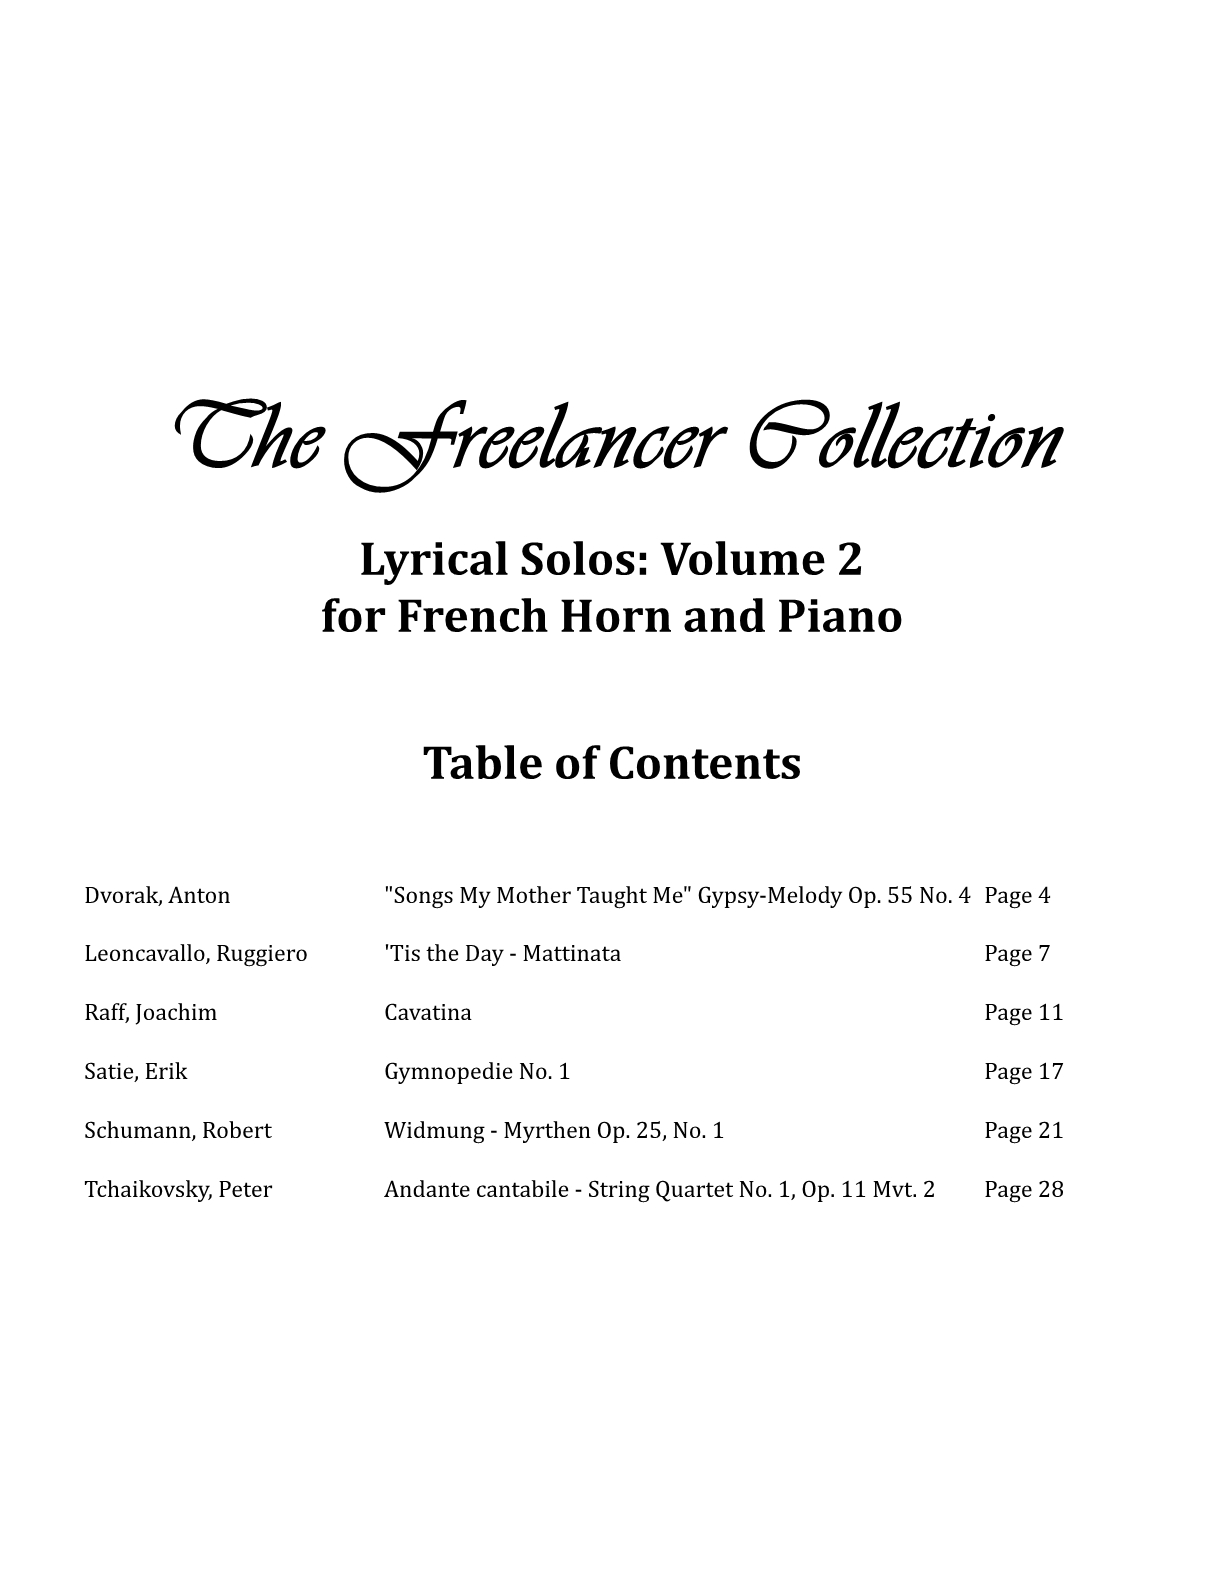 Hepler - Freelancer Collection Lyrical Solos Vol 2 (Hrn & Piano) - Click Image to Close